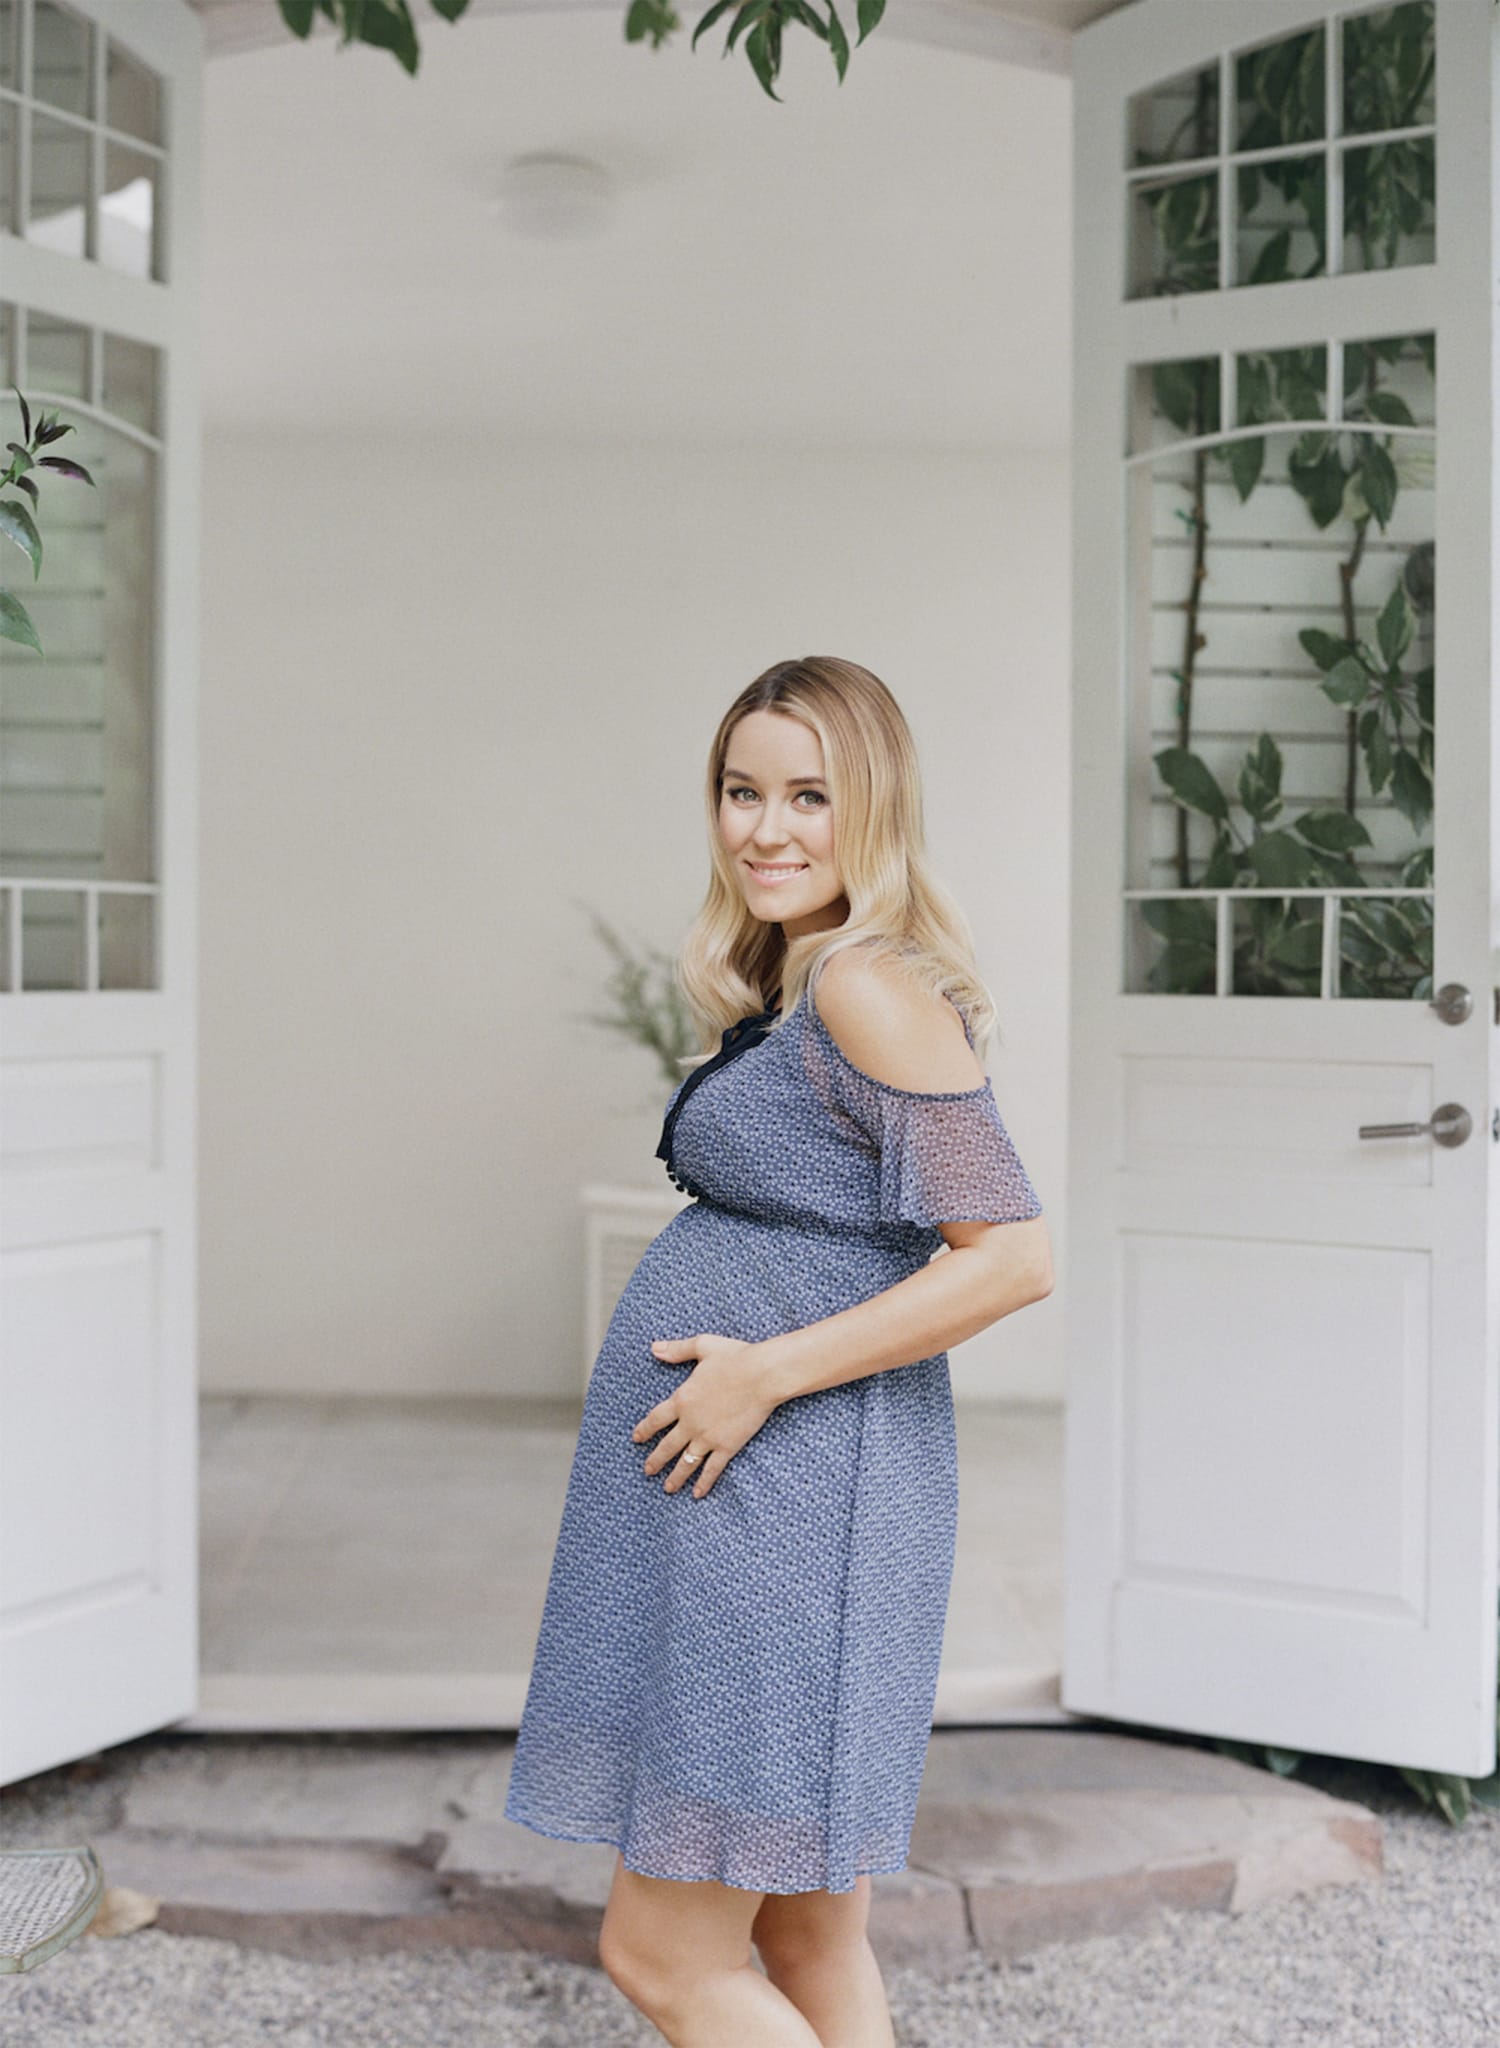 Lauren Conrad's Cutest Outfits of All Time